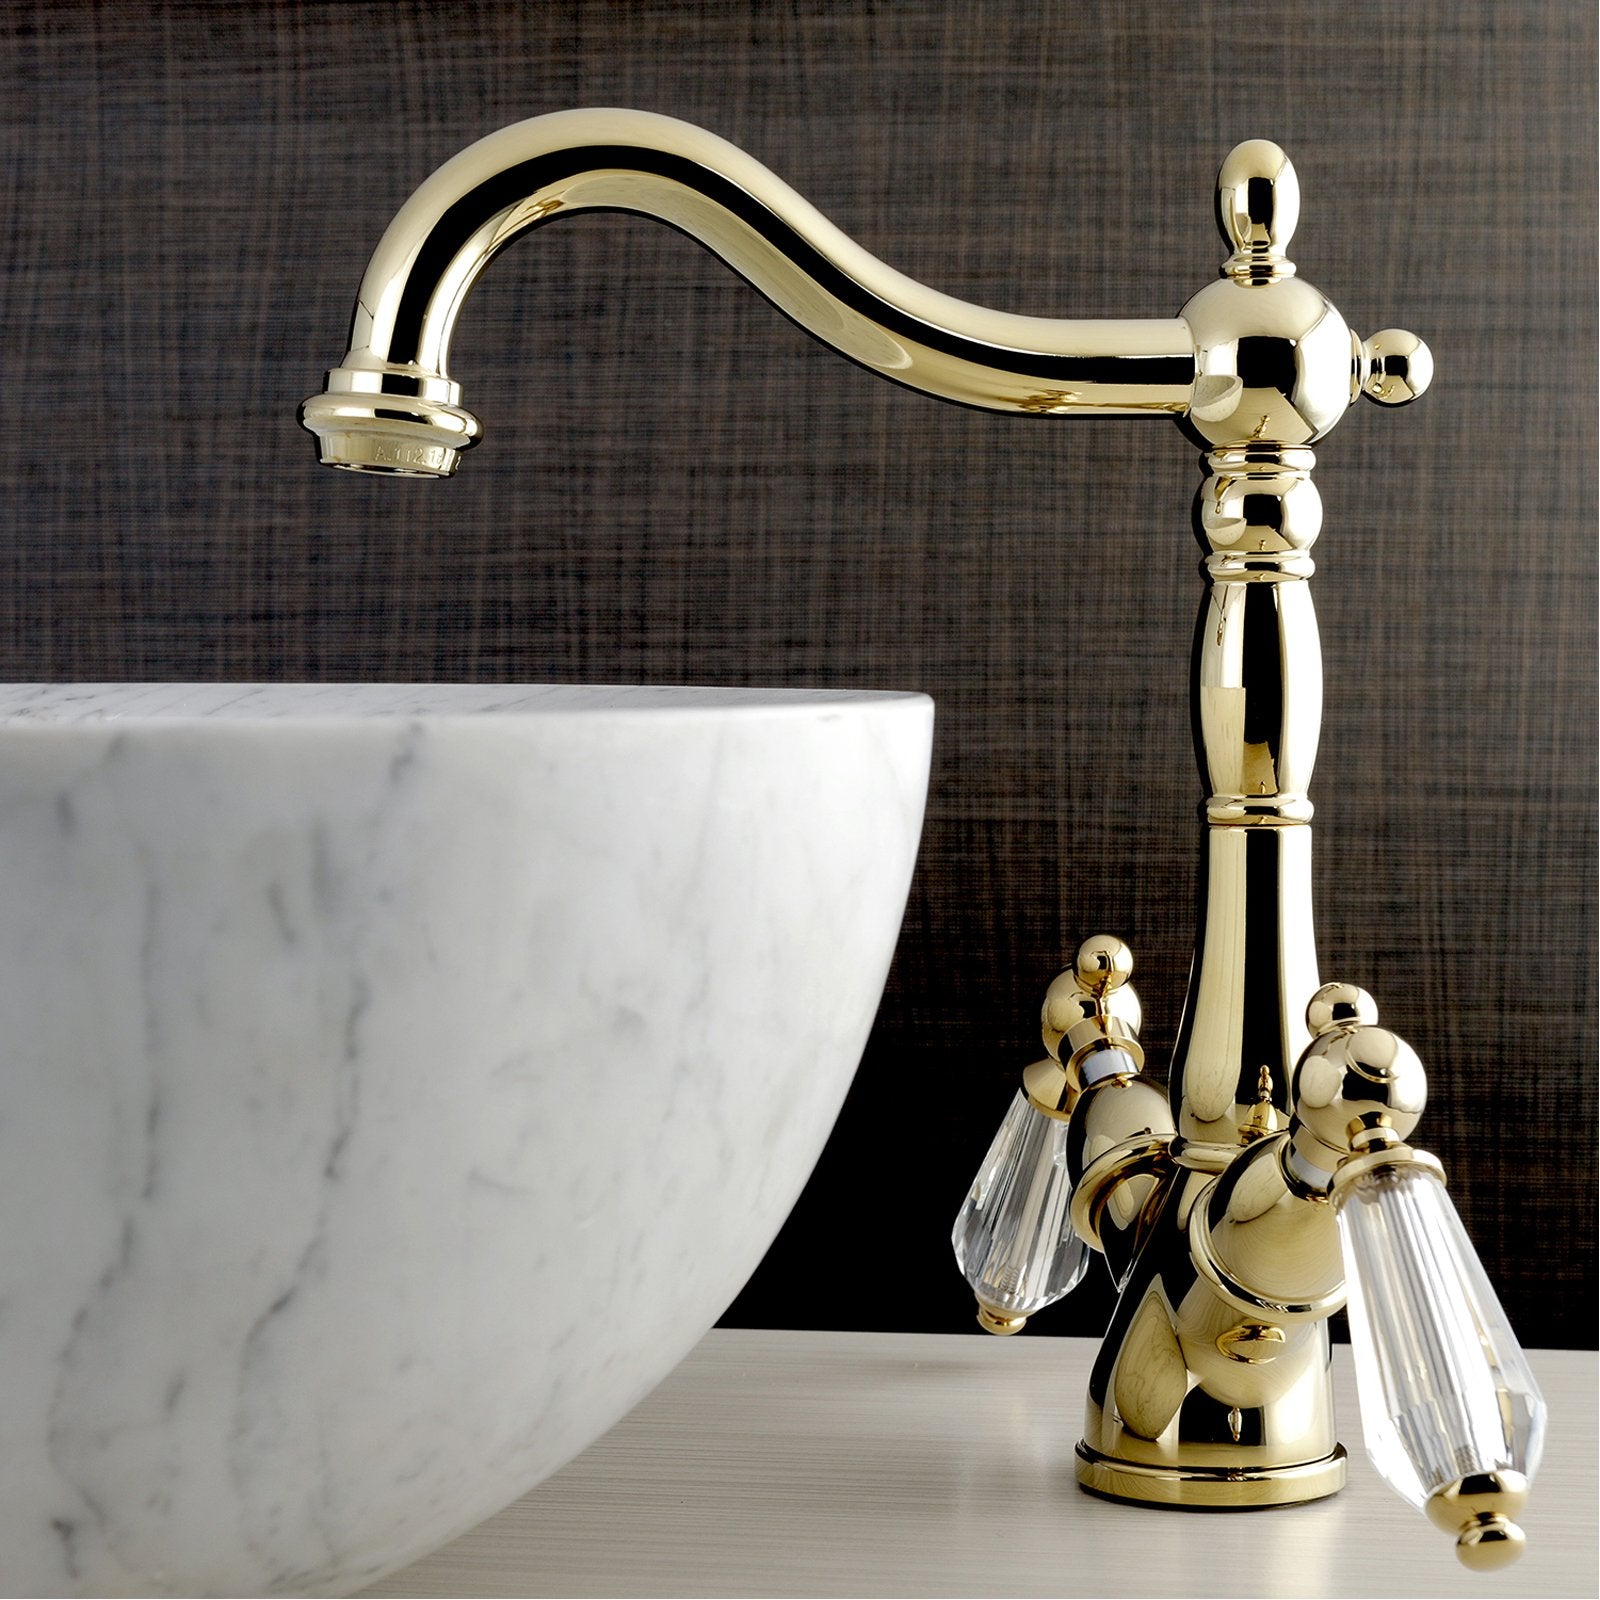 Kingston Brass Vessel Sink Faucet with Deck Plate-Bathroom Faucets-Free Shipping-Directsinks.